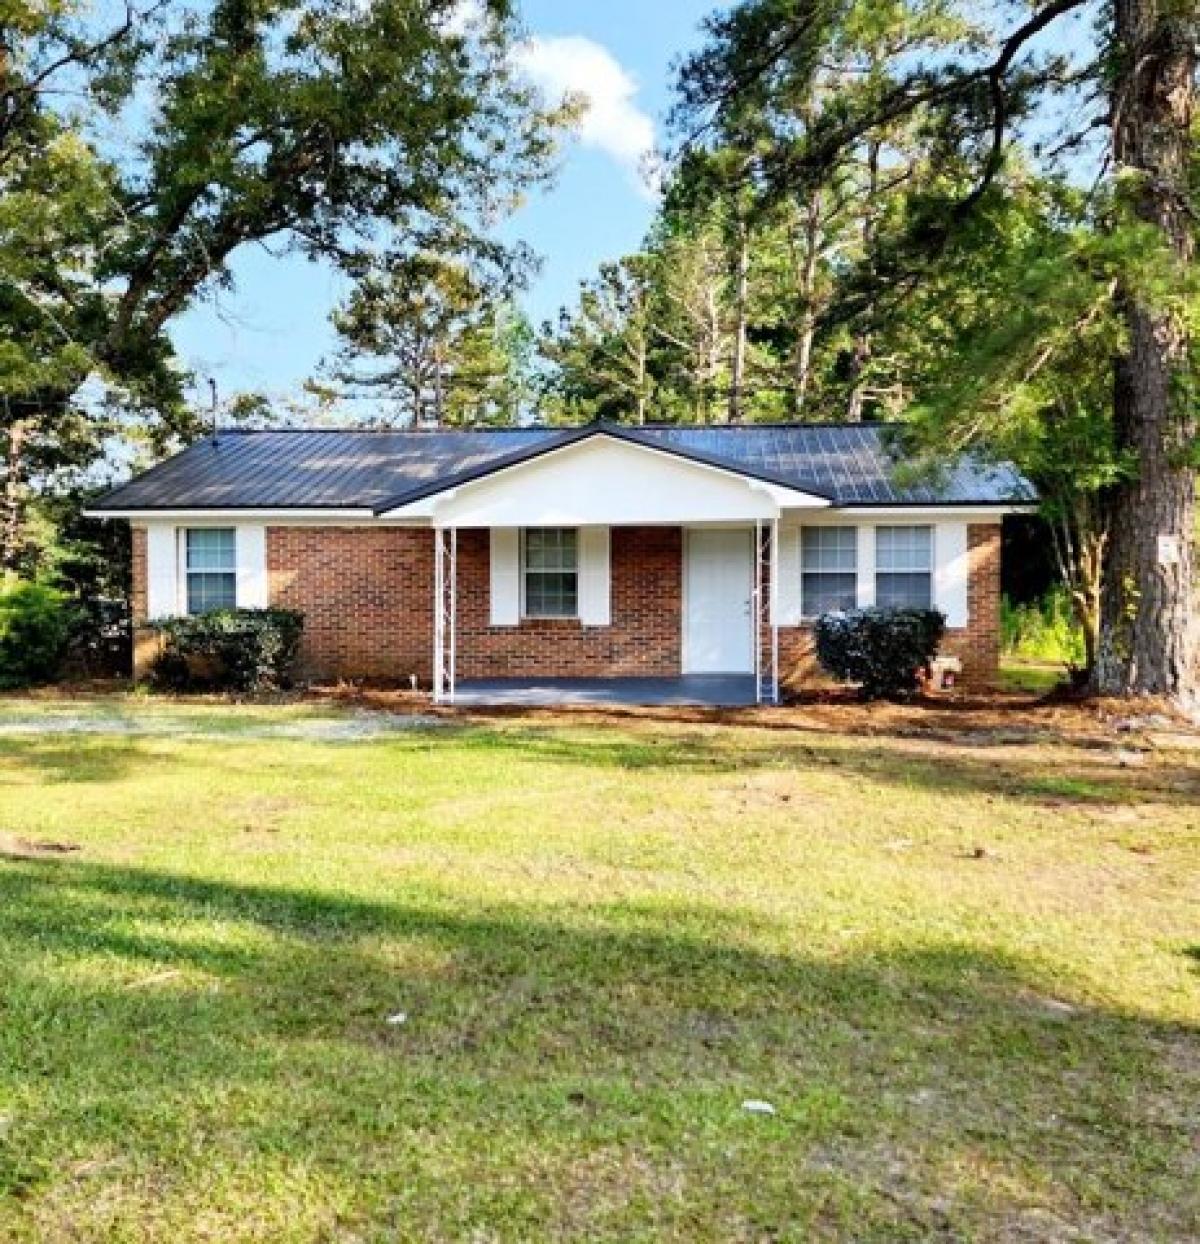 Picture of Home For Sale in Midway, Alabama, United States